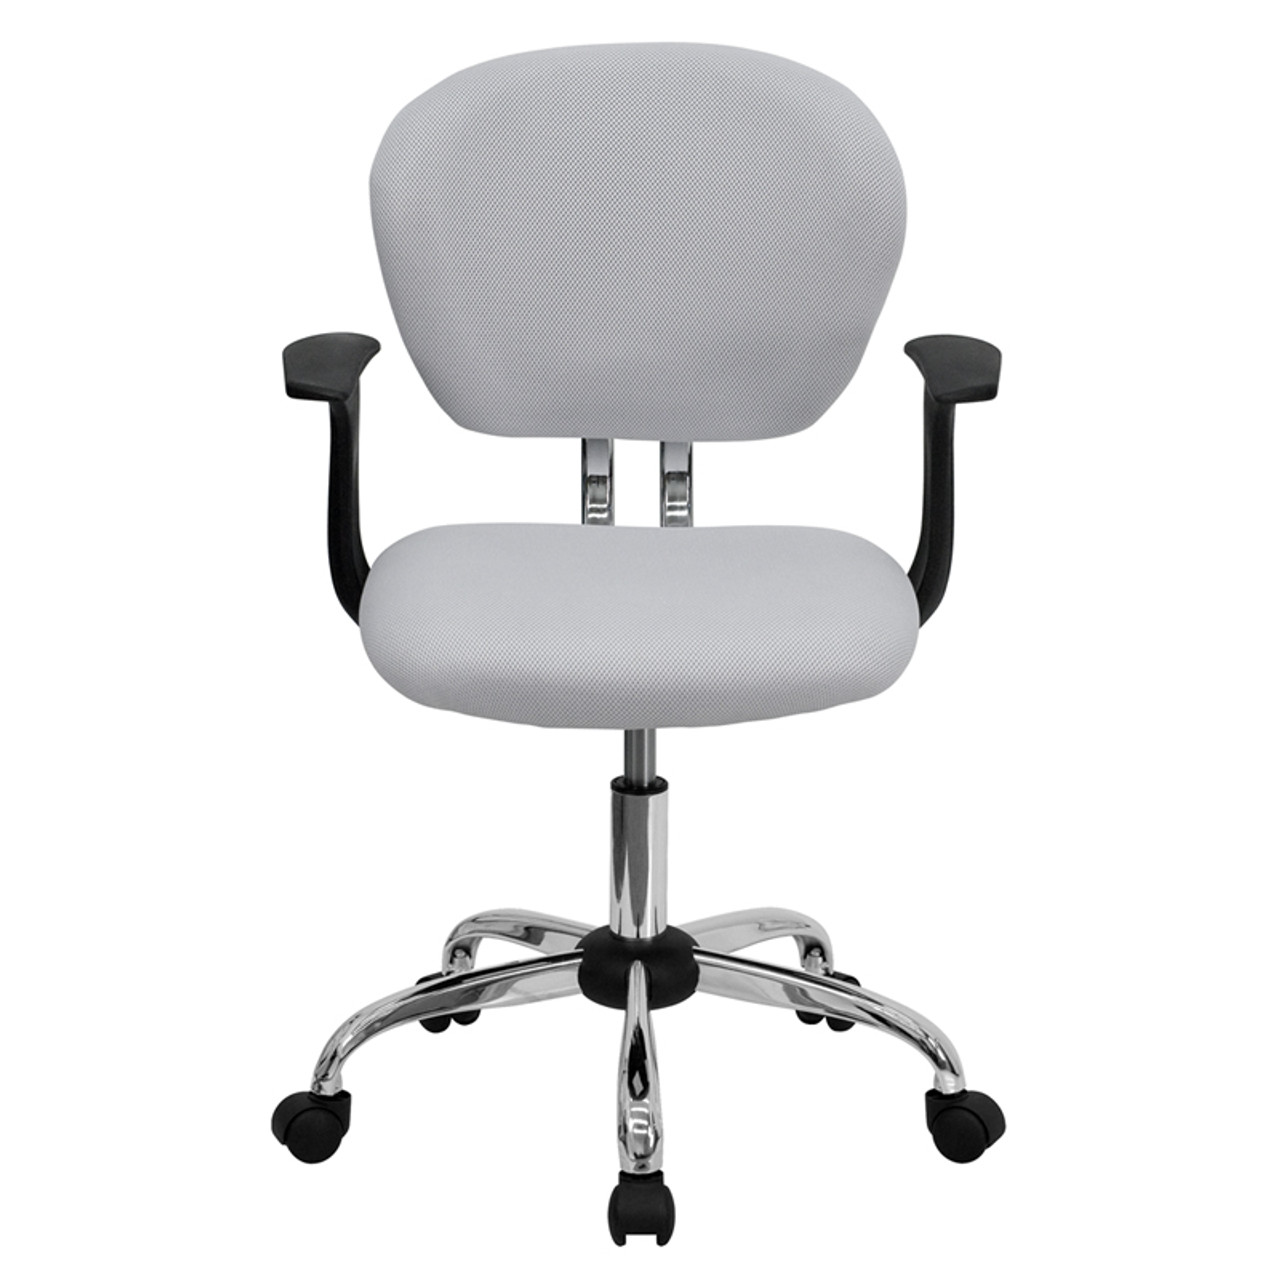 Mid-Back White Mesh Task Chair with Arms and Chrome Base , #FF-0136-14